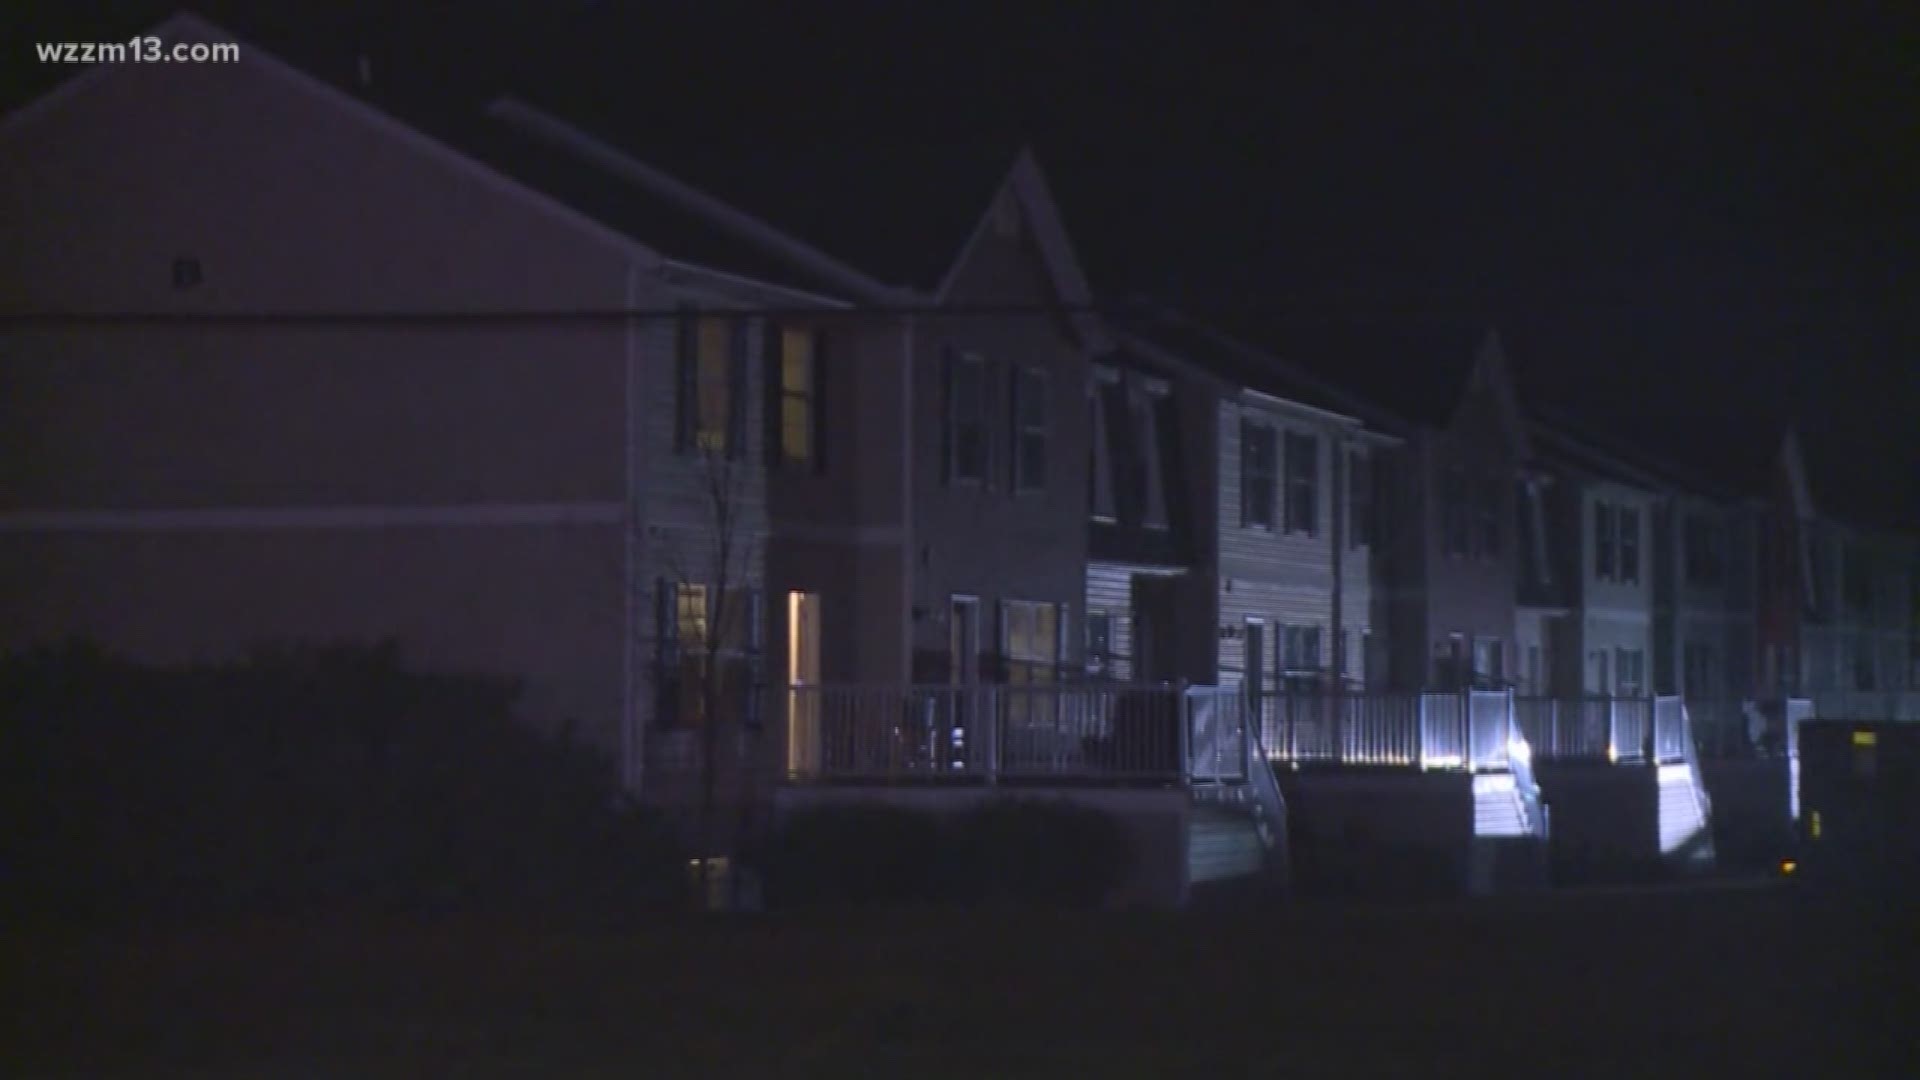 Shooting at Allendale apartment complex injures 2 men